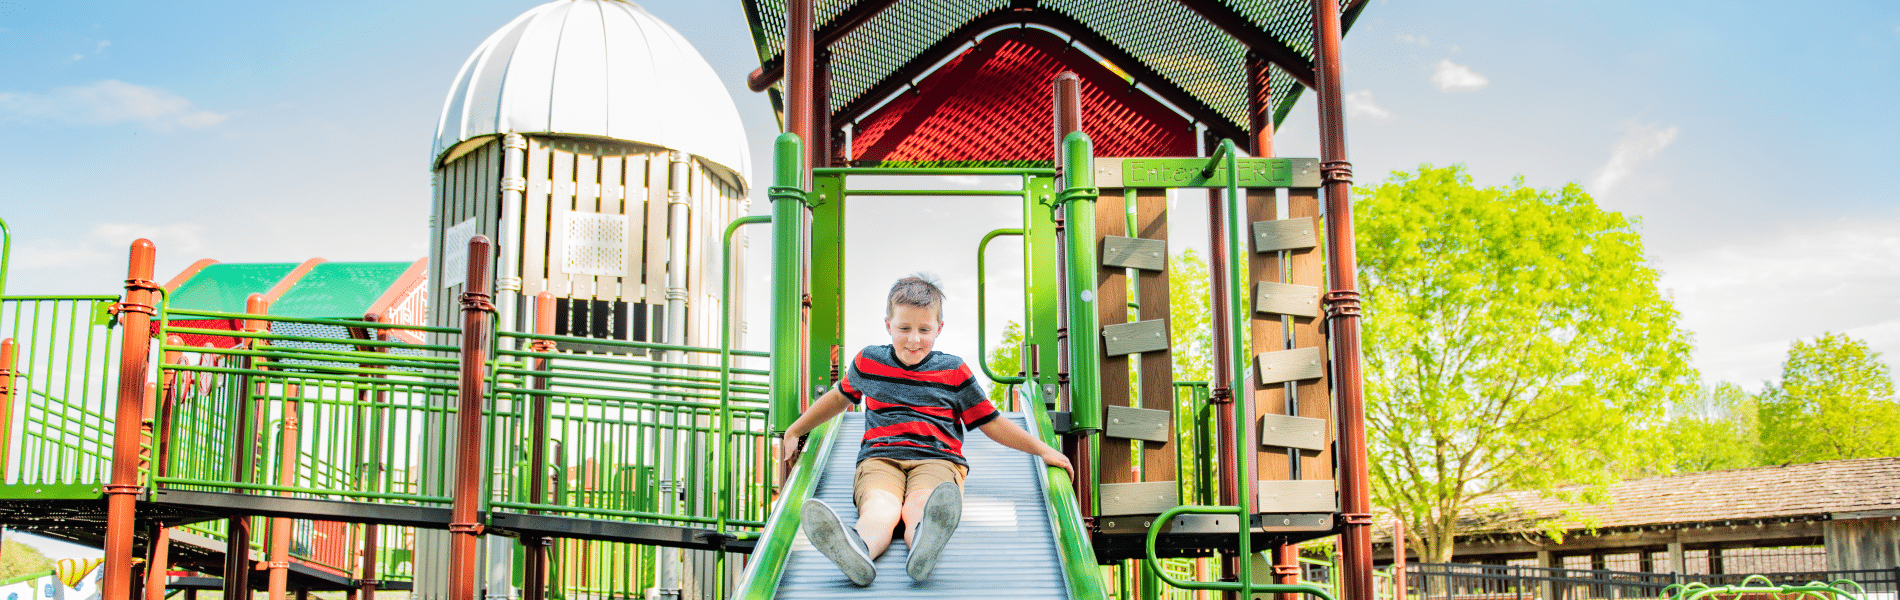 Boy going down a slide at Ag Adventures park